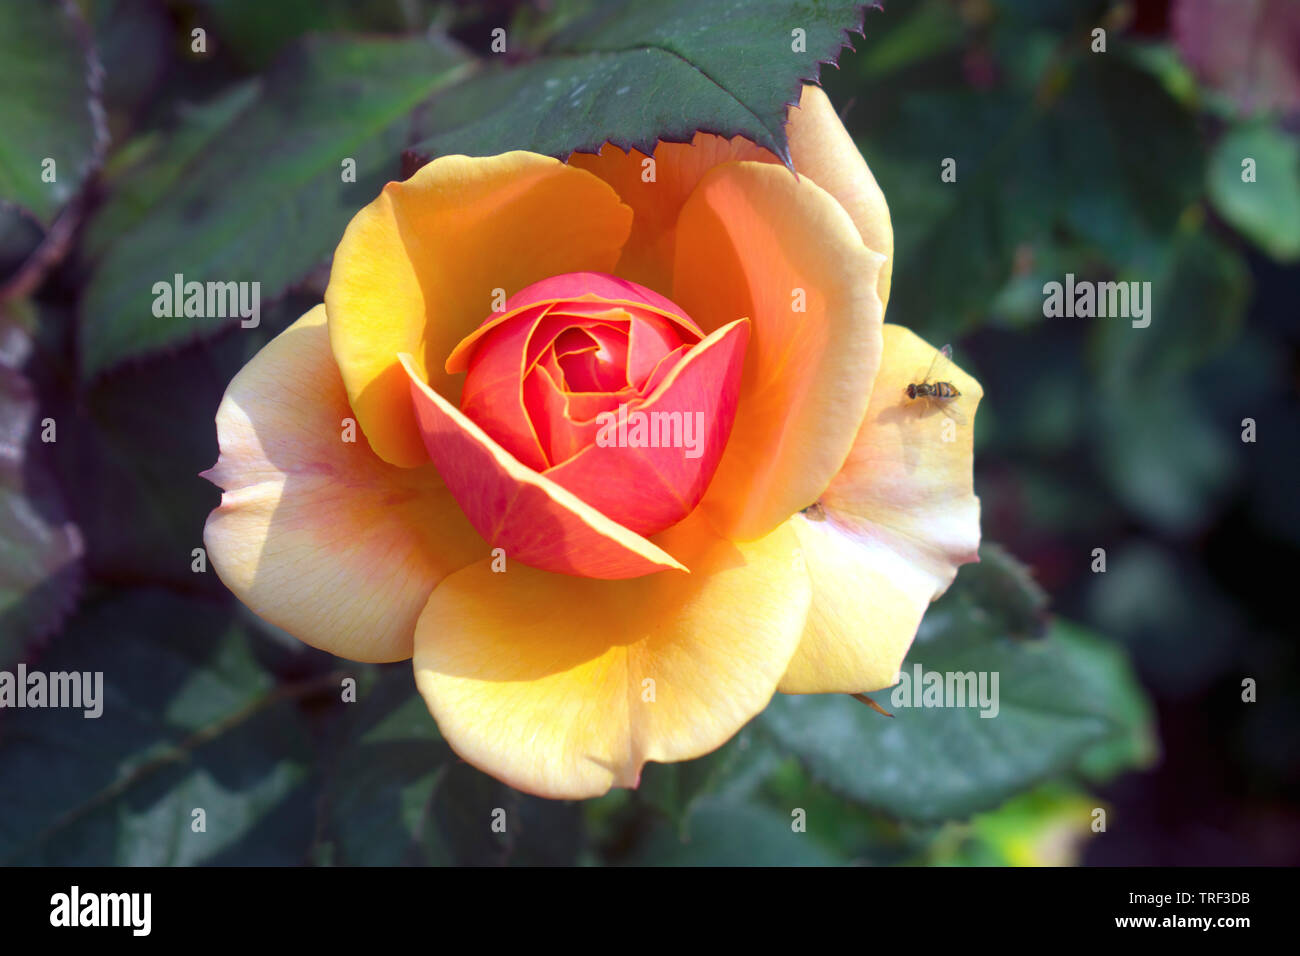 Large isolated yellow rose, with some peach shading in the center, on a bed of dark green leaves Stock Photo